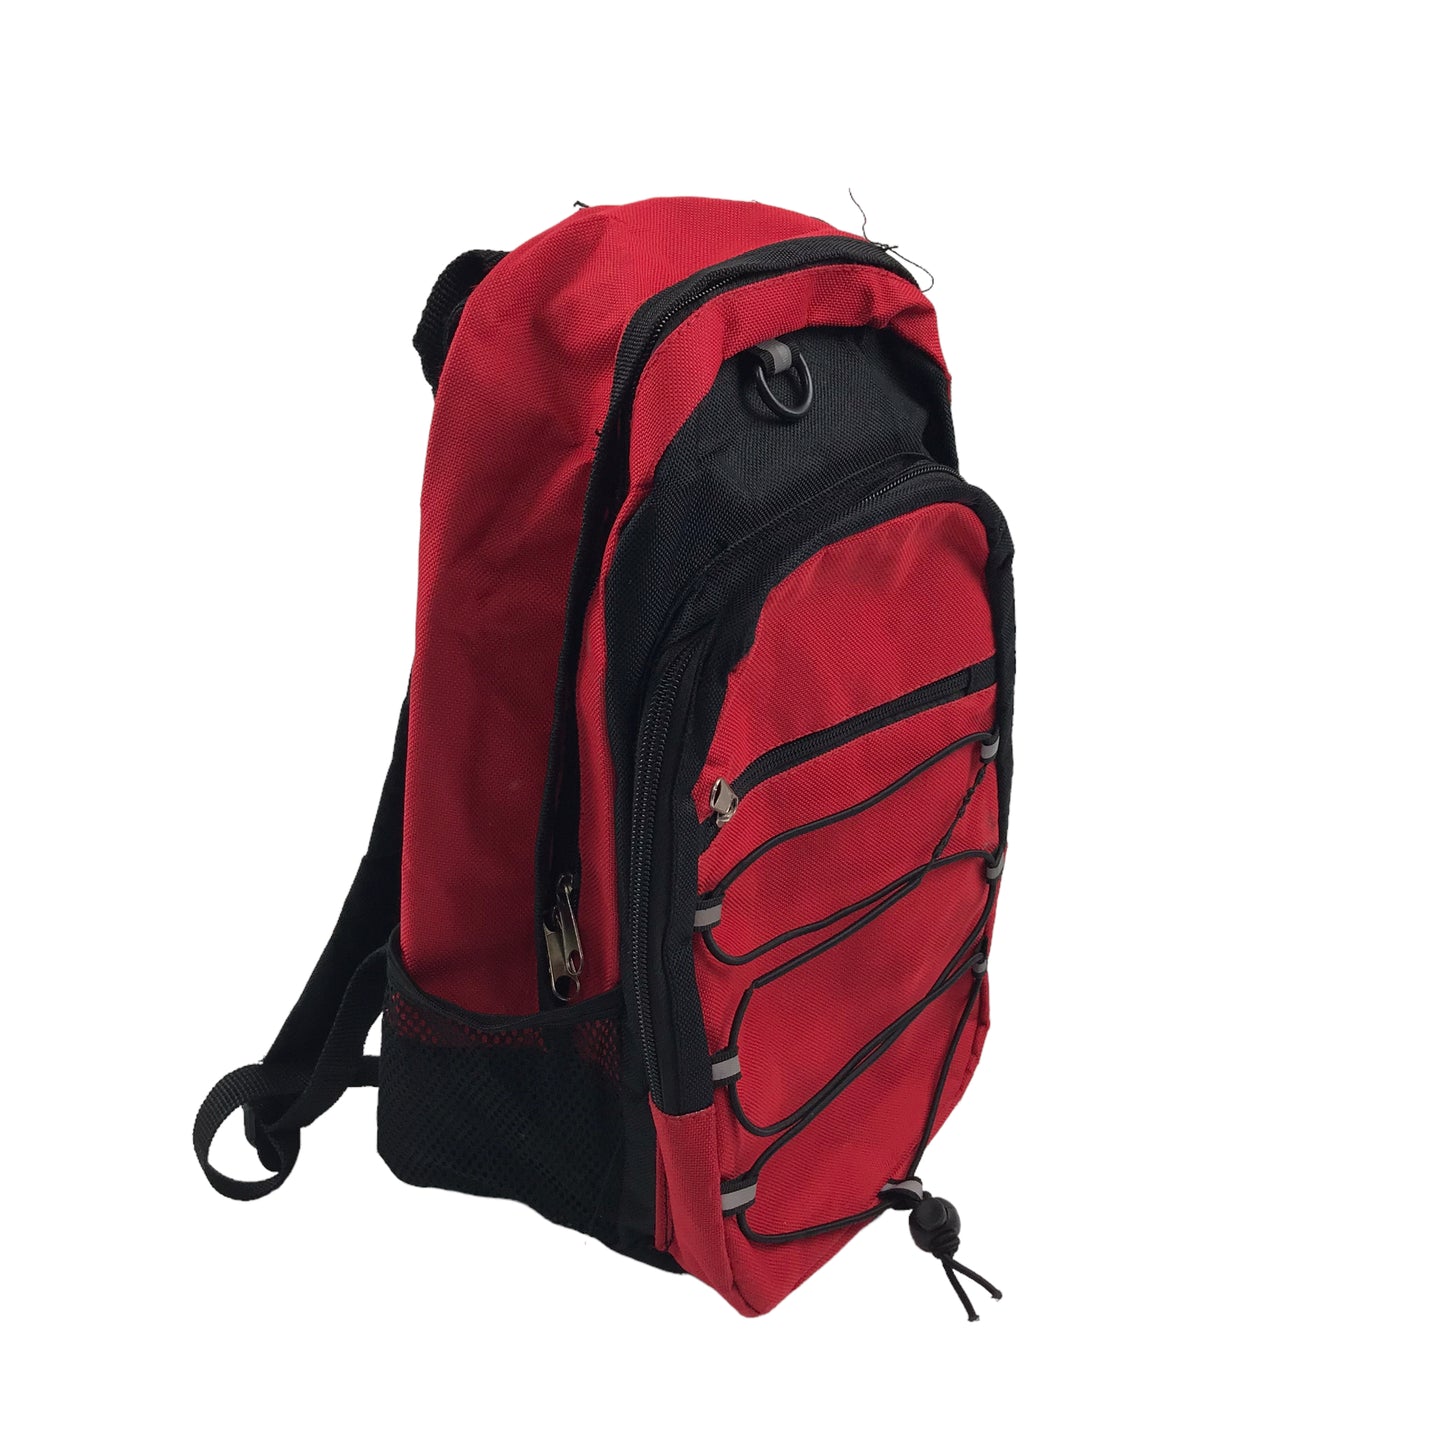 Small Red and Black Rucksack